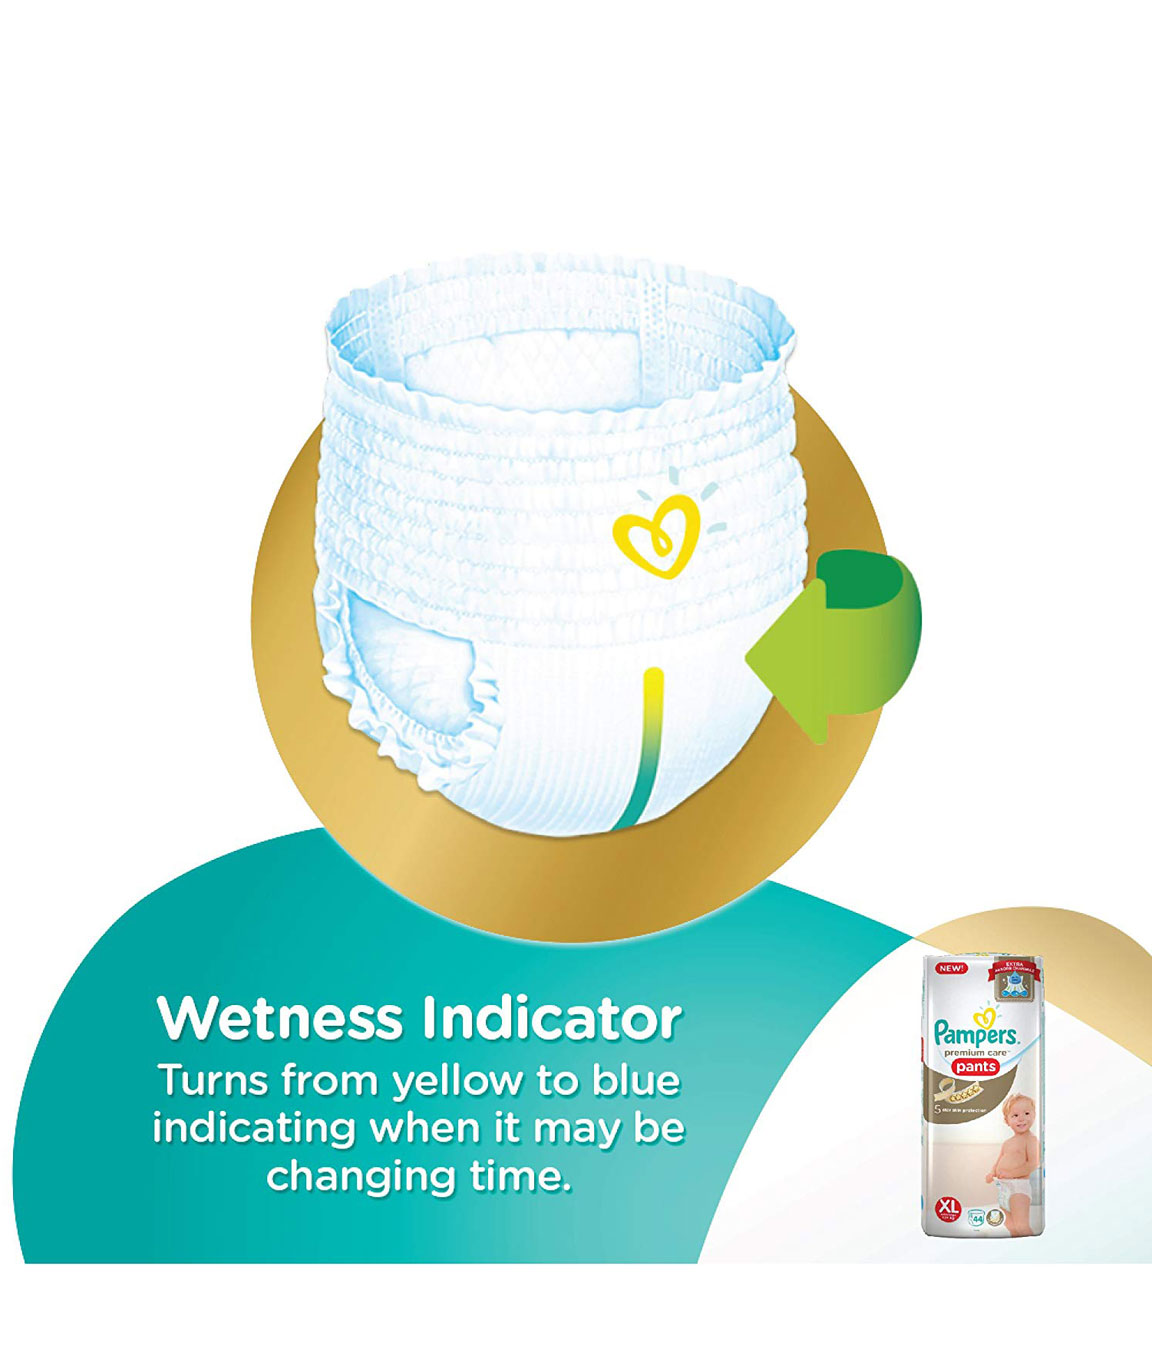 Buy Pampers Taped Baby Diapers, Medium, (MD), 66 count & Pampers Premium  Care Pants, Large size baby diapers (LG), 44 Count, Softest ever Pampers  pants Online at Low Prices in India - Amazon.in